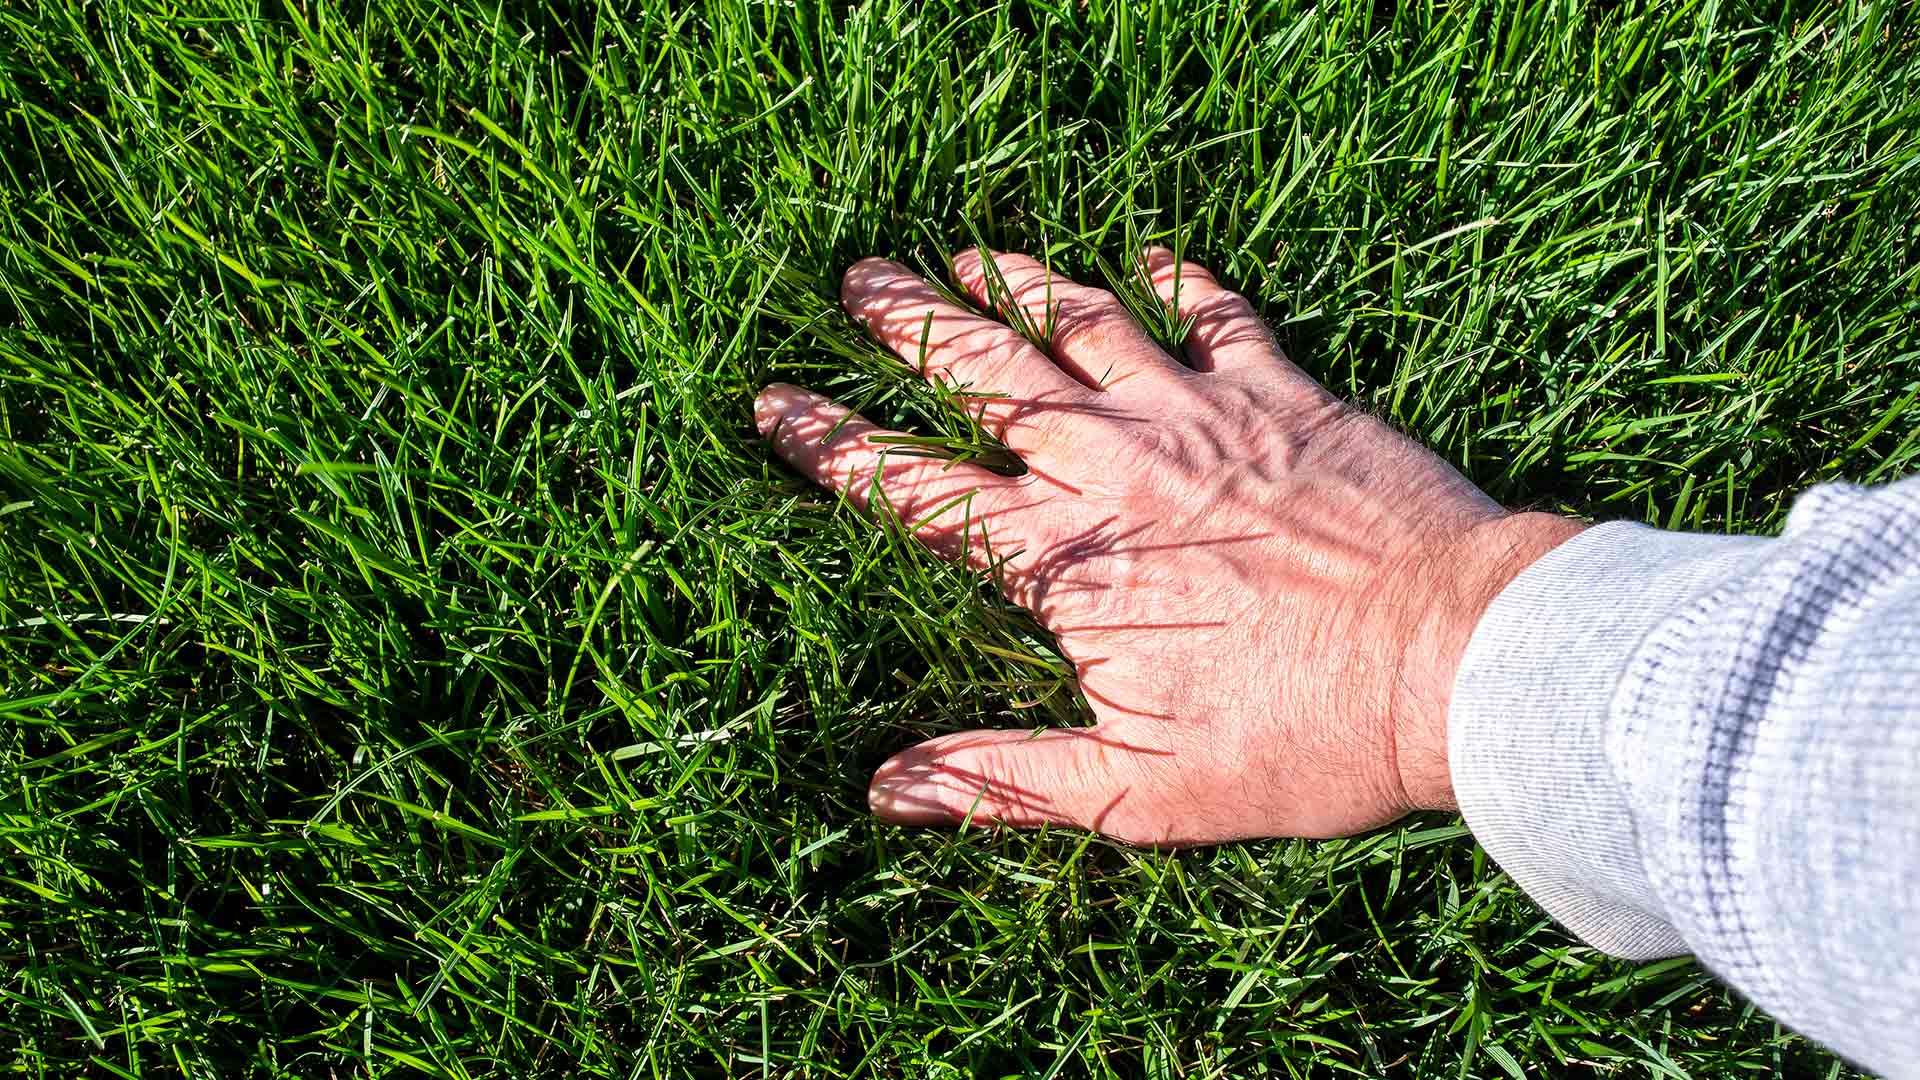 Hand feeling healthy grown lawn in Liberty Township, OH.